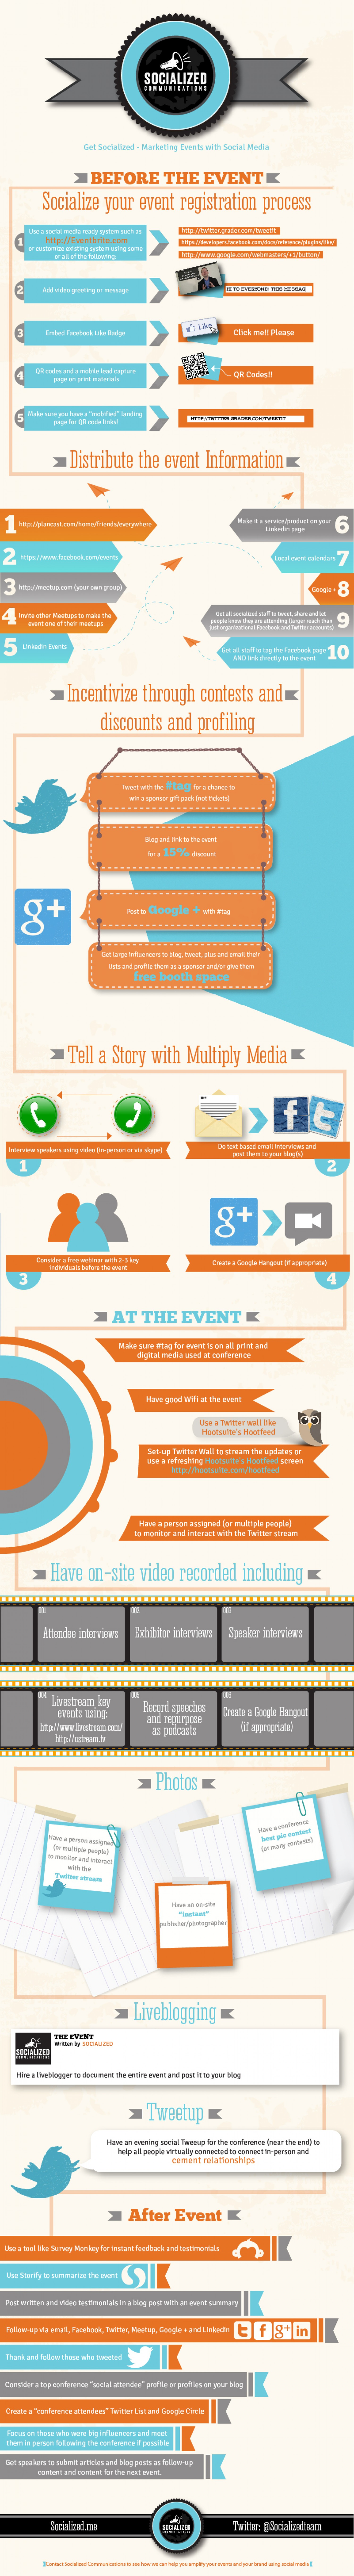 Social Media Event Promotion Infographic